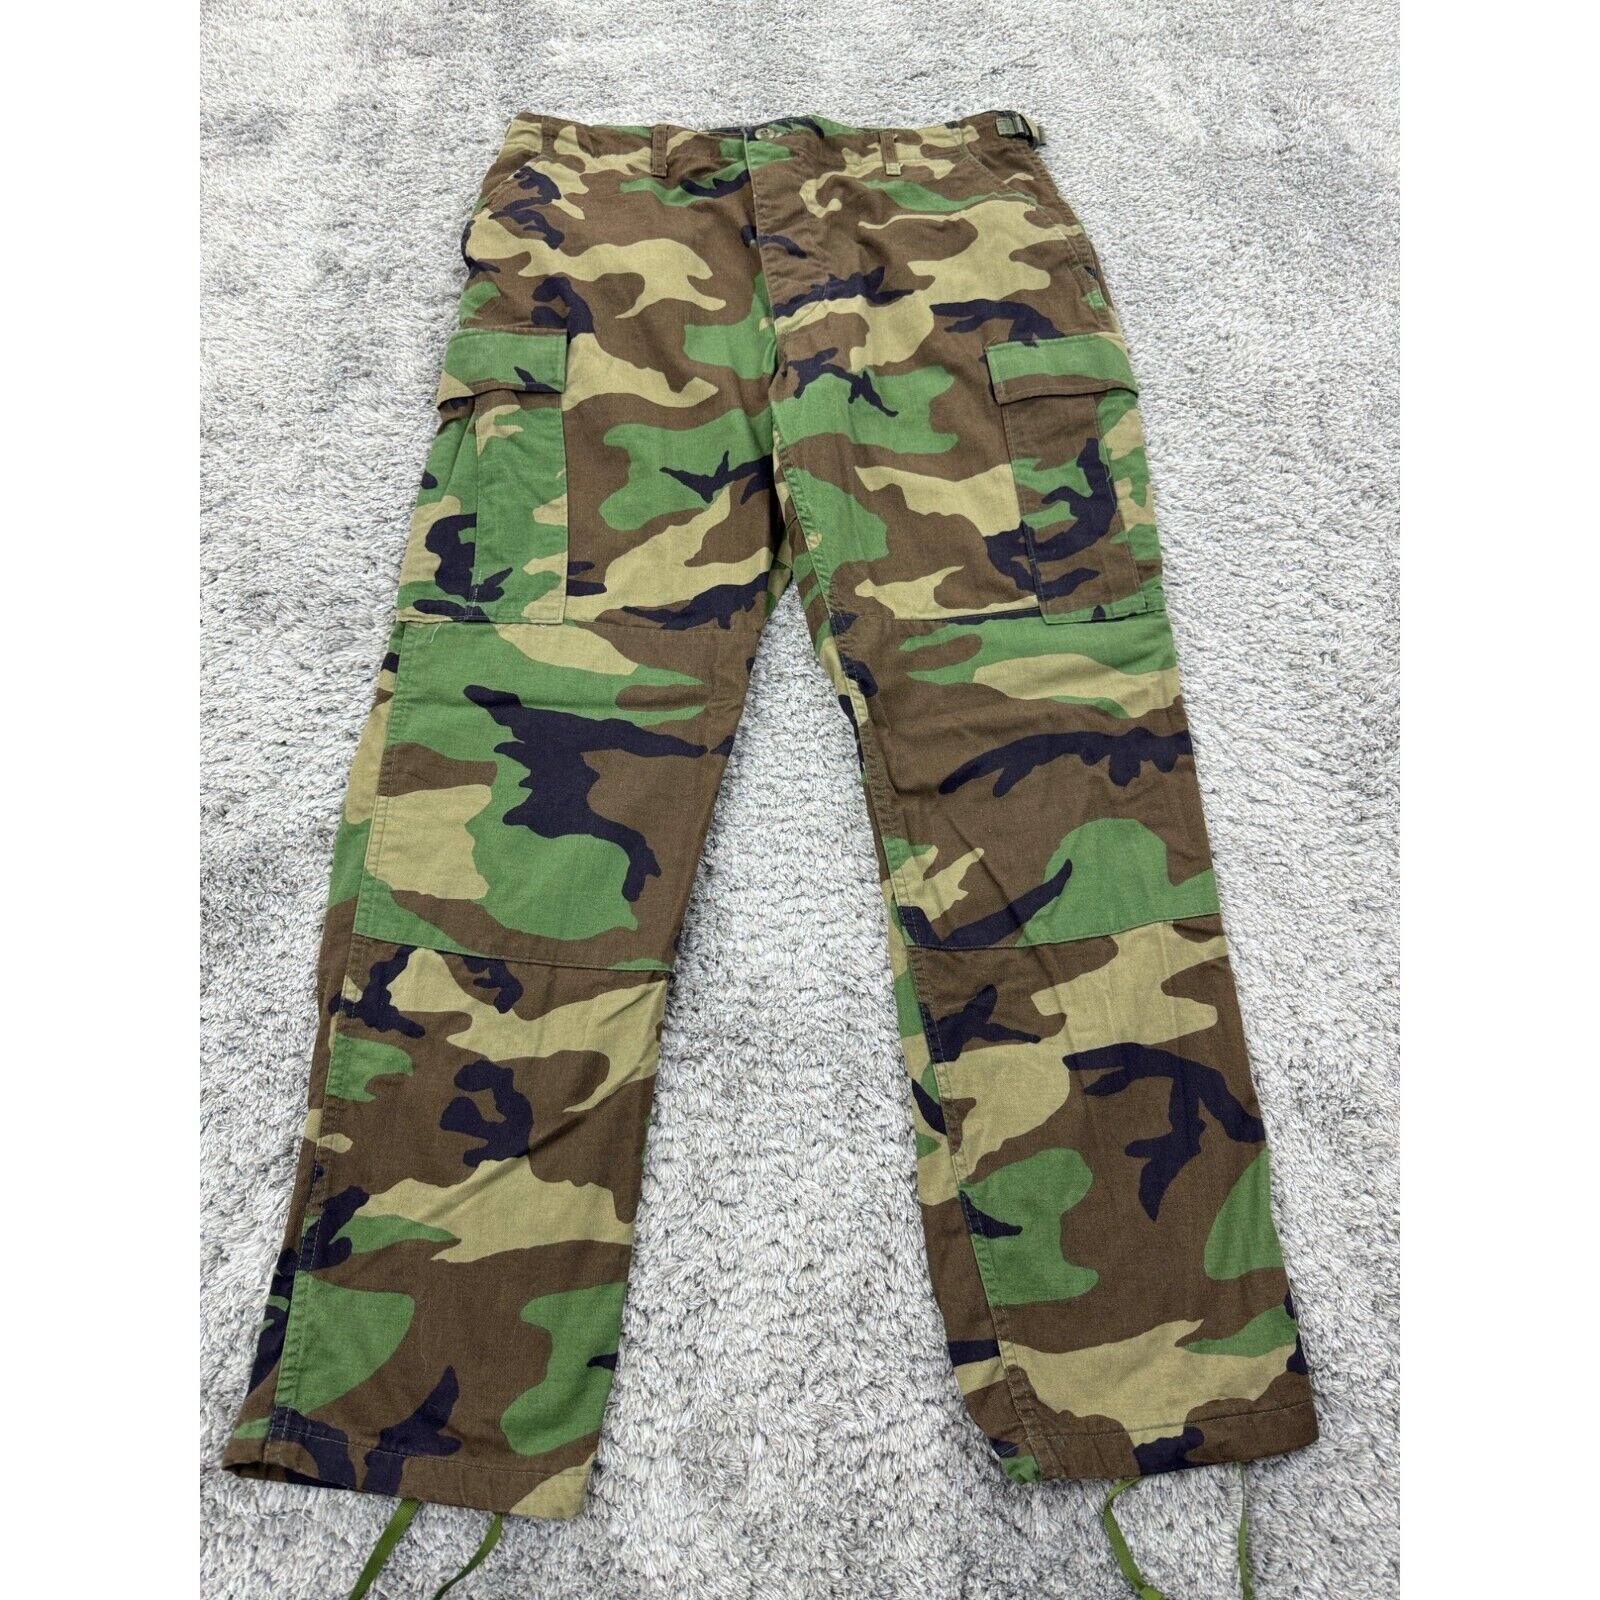 US Military Combat Trousers Mens Large Reg Woodland Camo Button Fly Cargo Pants